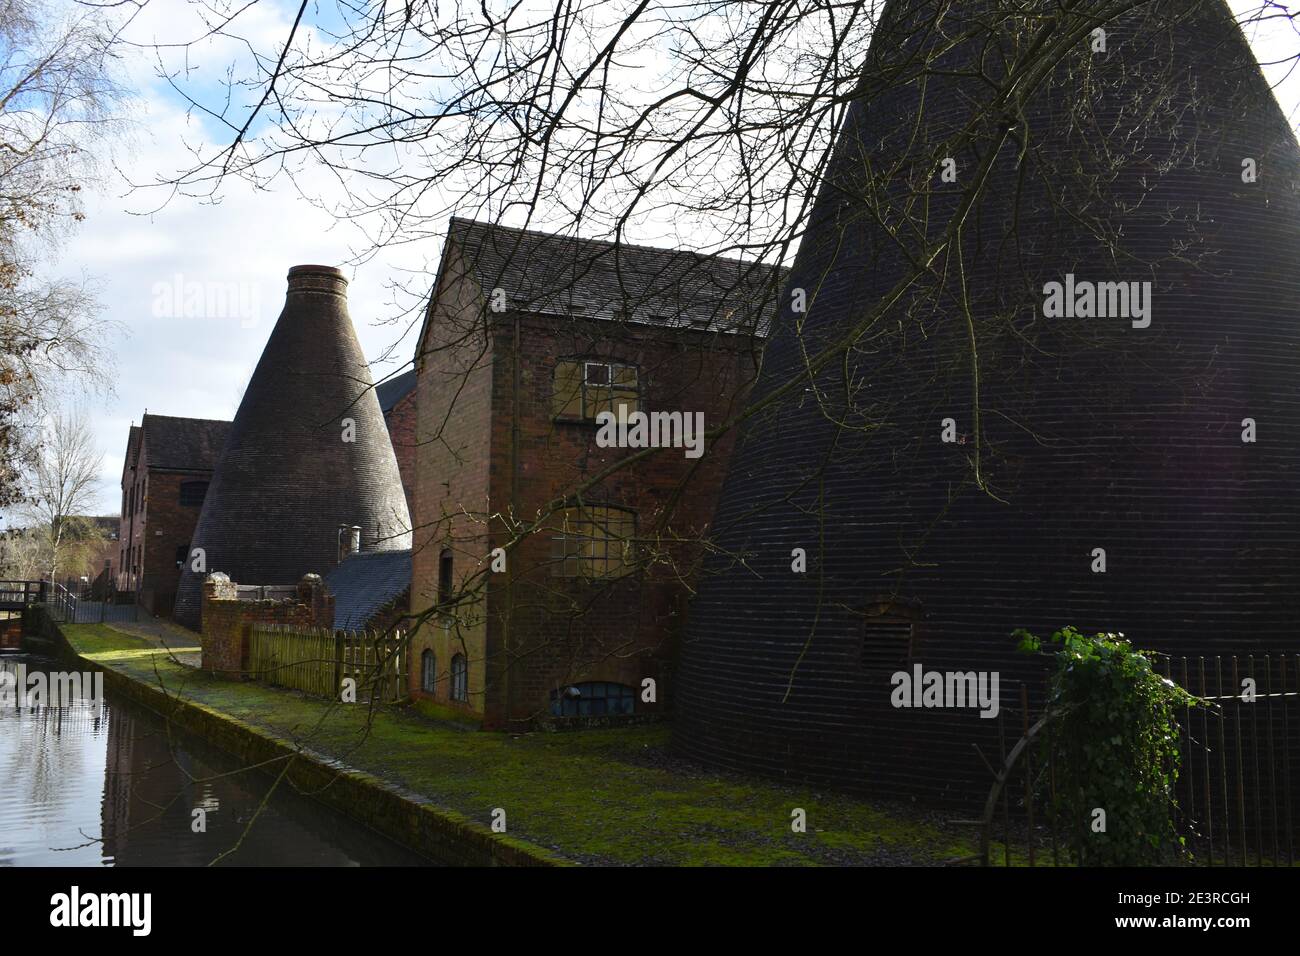 Brick built bottle kilns at Coalport china museum, Telford, Shropshire by a canal with reflections in water on a lovely sunny winter's day Stock Photo